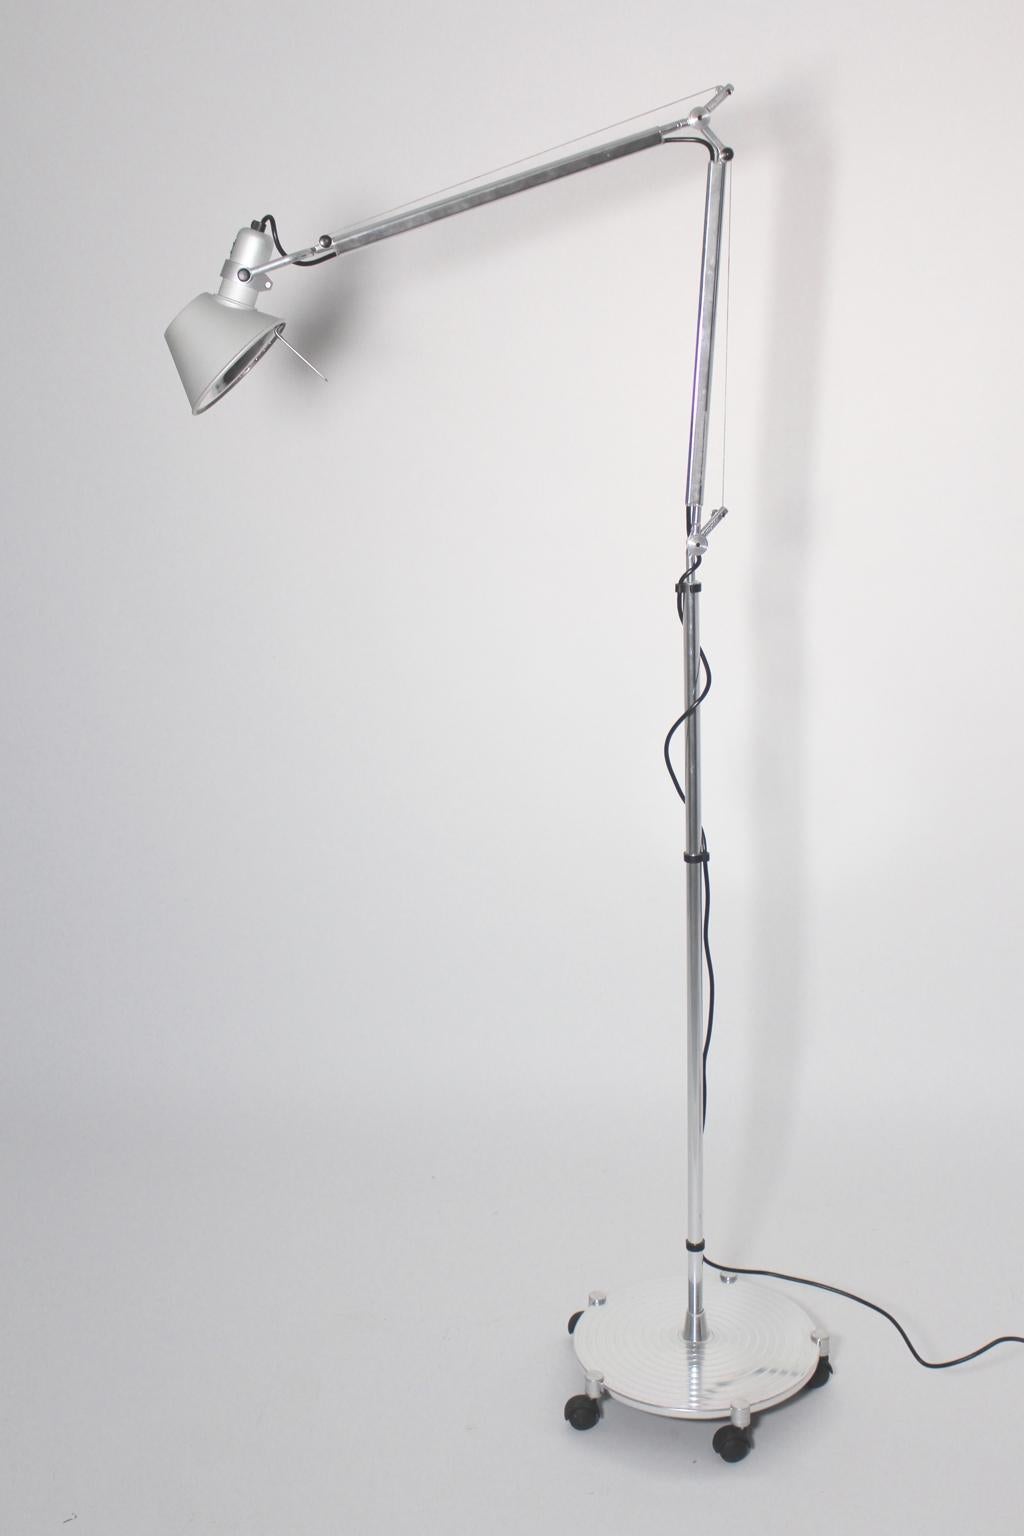 This vintage floor lamp named Tolomeo terra floor lamp designed by Michel de Lucchi & Giancarlo Fassina 1987, Italy and produced by Artemide, Pregnano Milanese Italy, shows a great iconic design.
With 5 wheels the floor lamp provides a wide area of